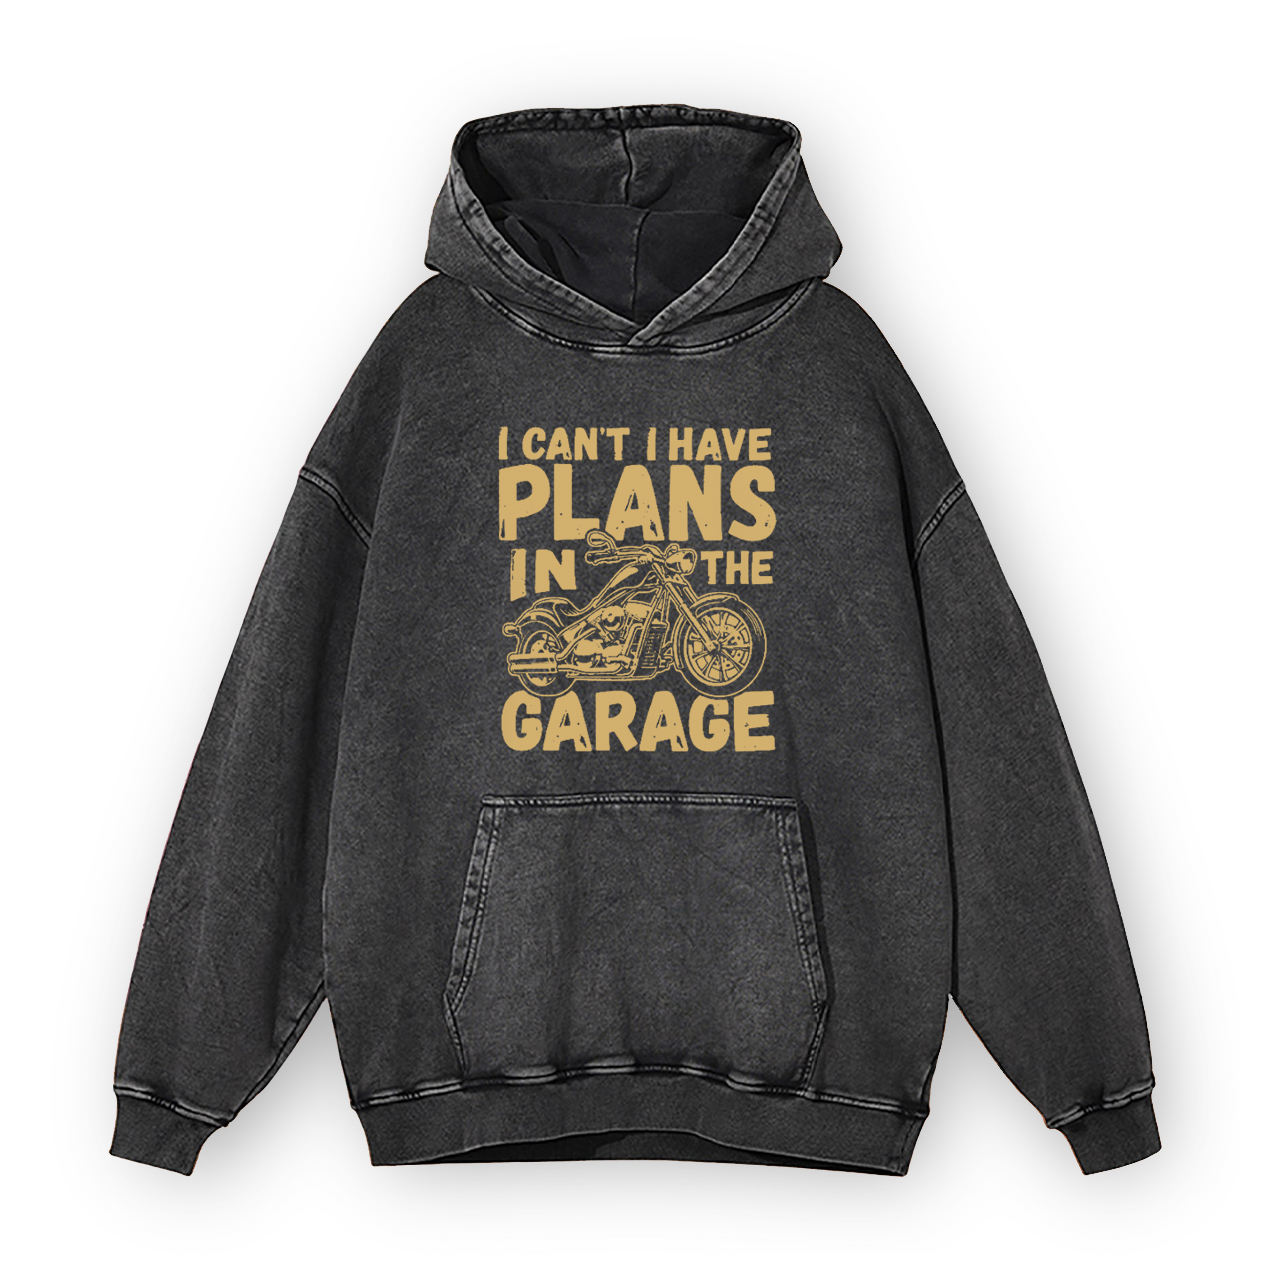 I Can't I Have Plans In The Garage Funny Motorcycle Garment-Dye Hoodies